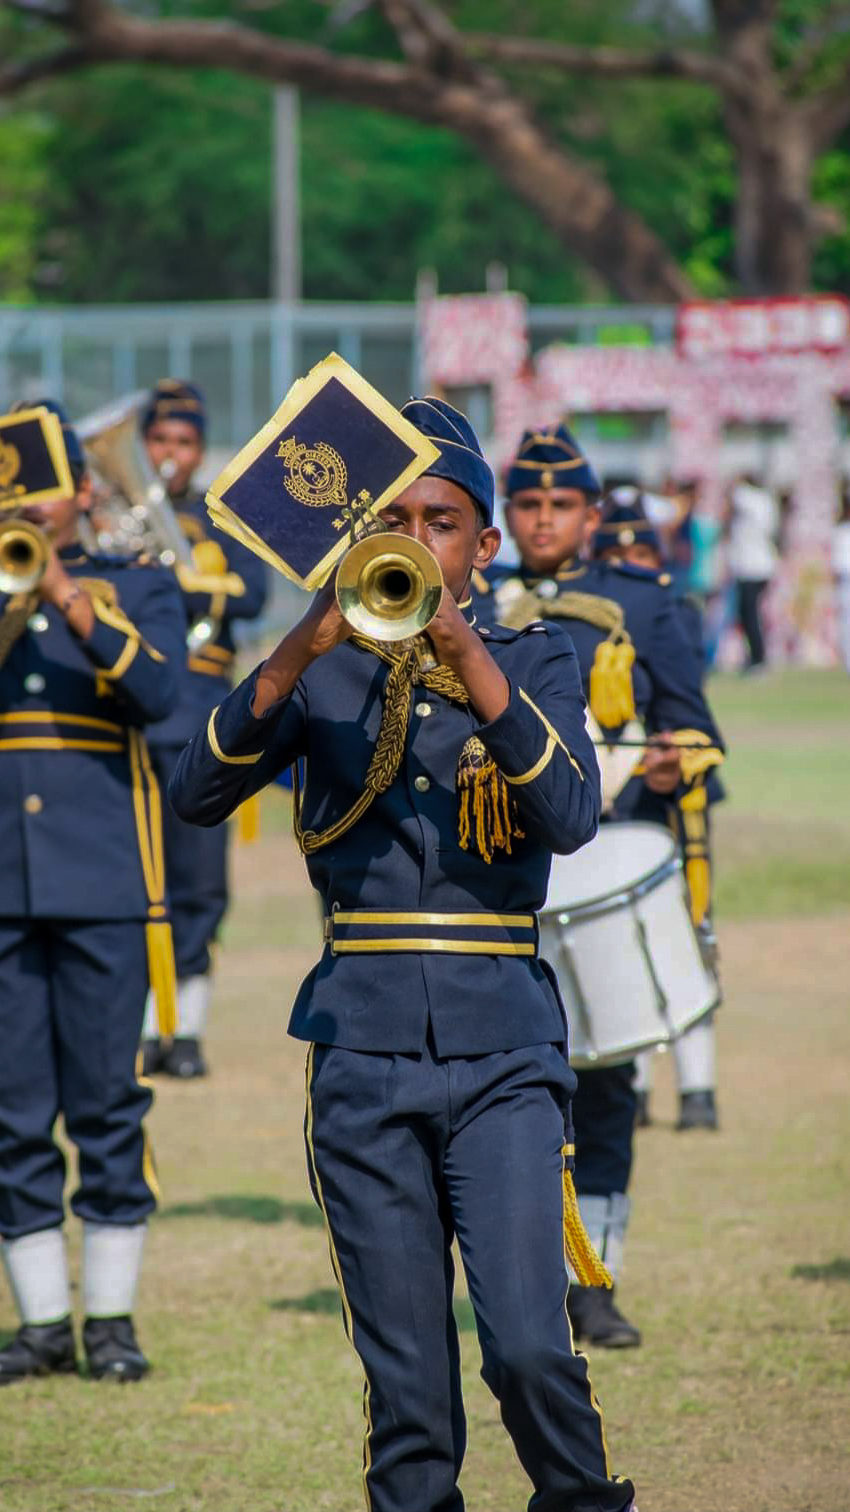 Royal College Cadet playing the trumpet